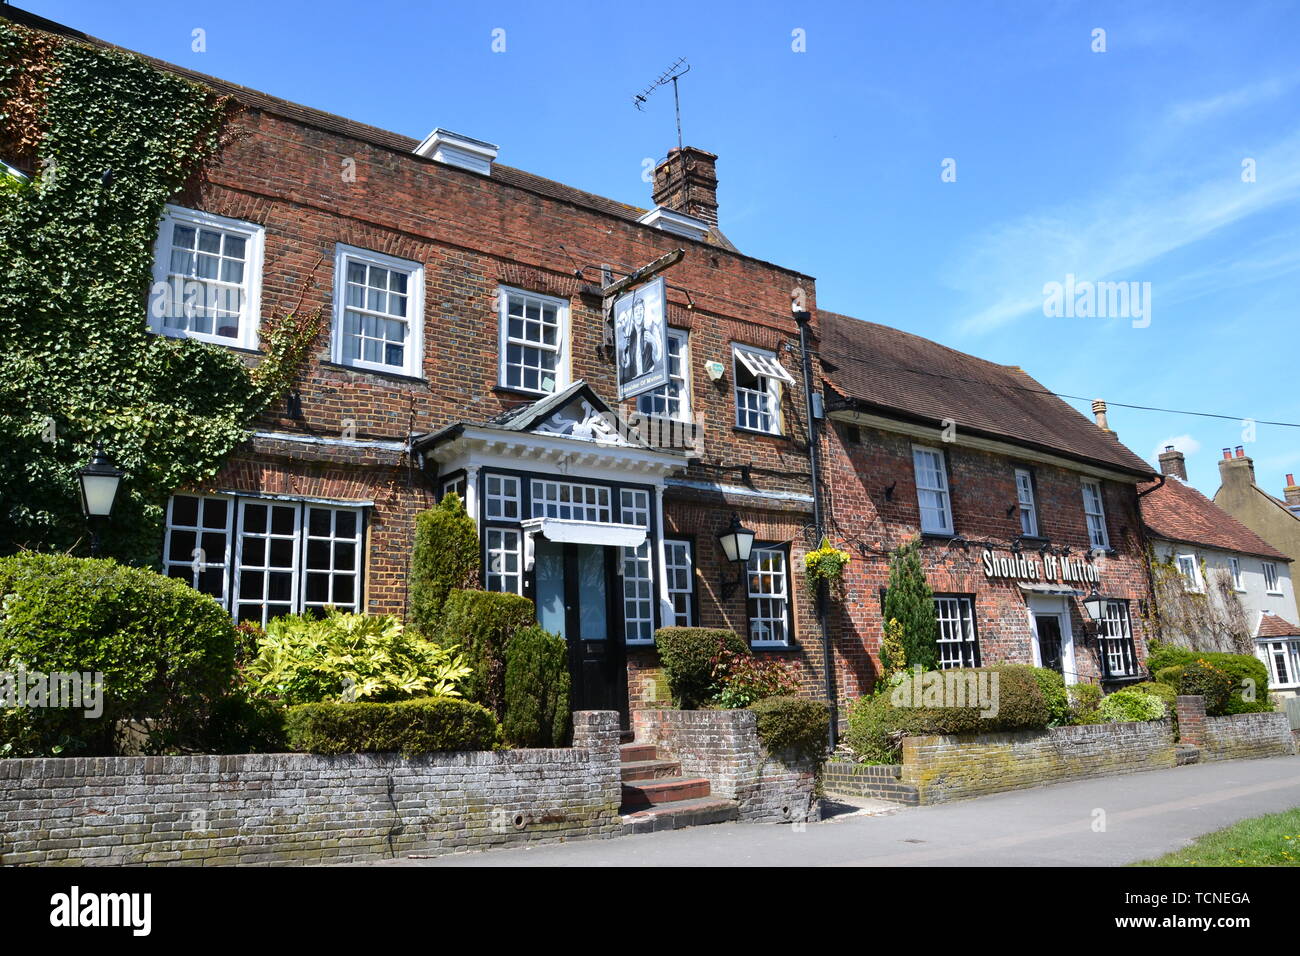 The Shoulder of Mutton, Wendover town centre, Buckinghamshire, UK Stock Photo